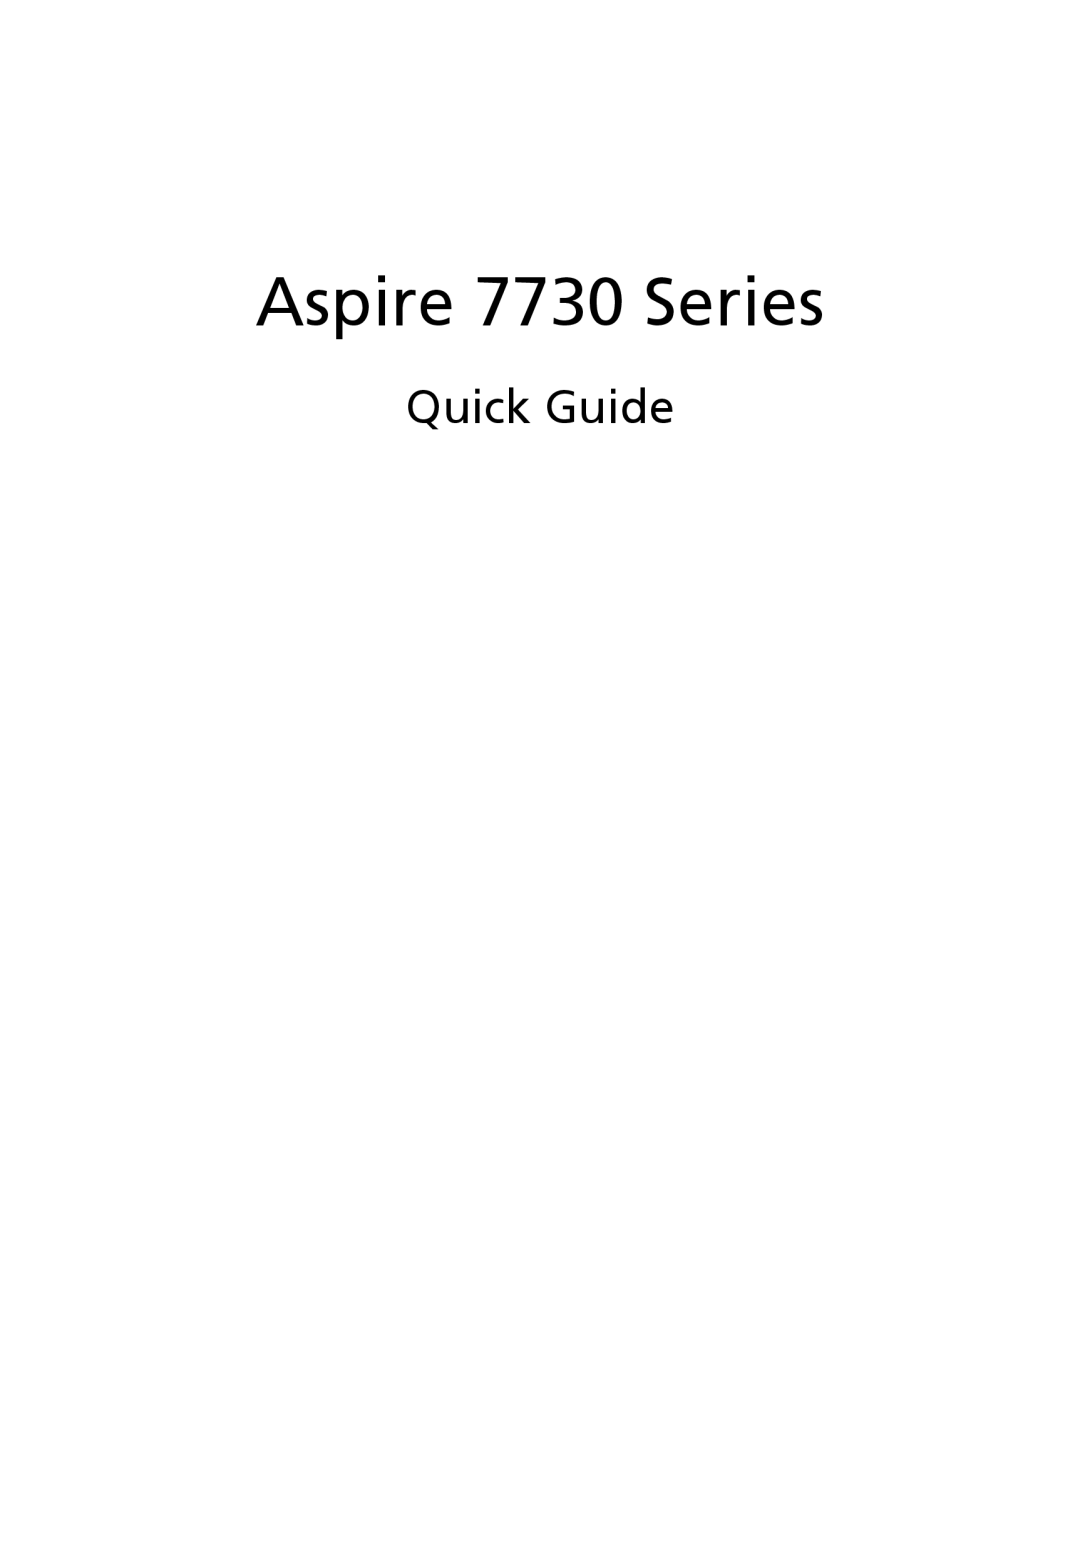 Acer manual Quick Guide, Aspire 7730 Series 